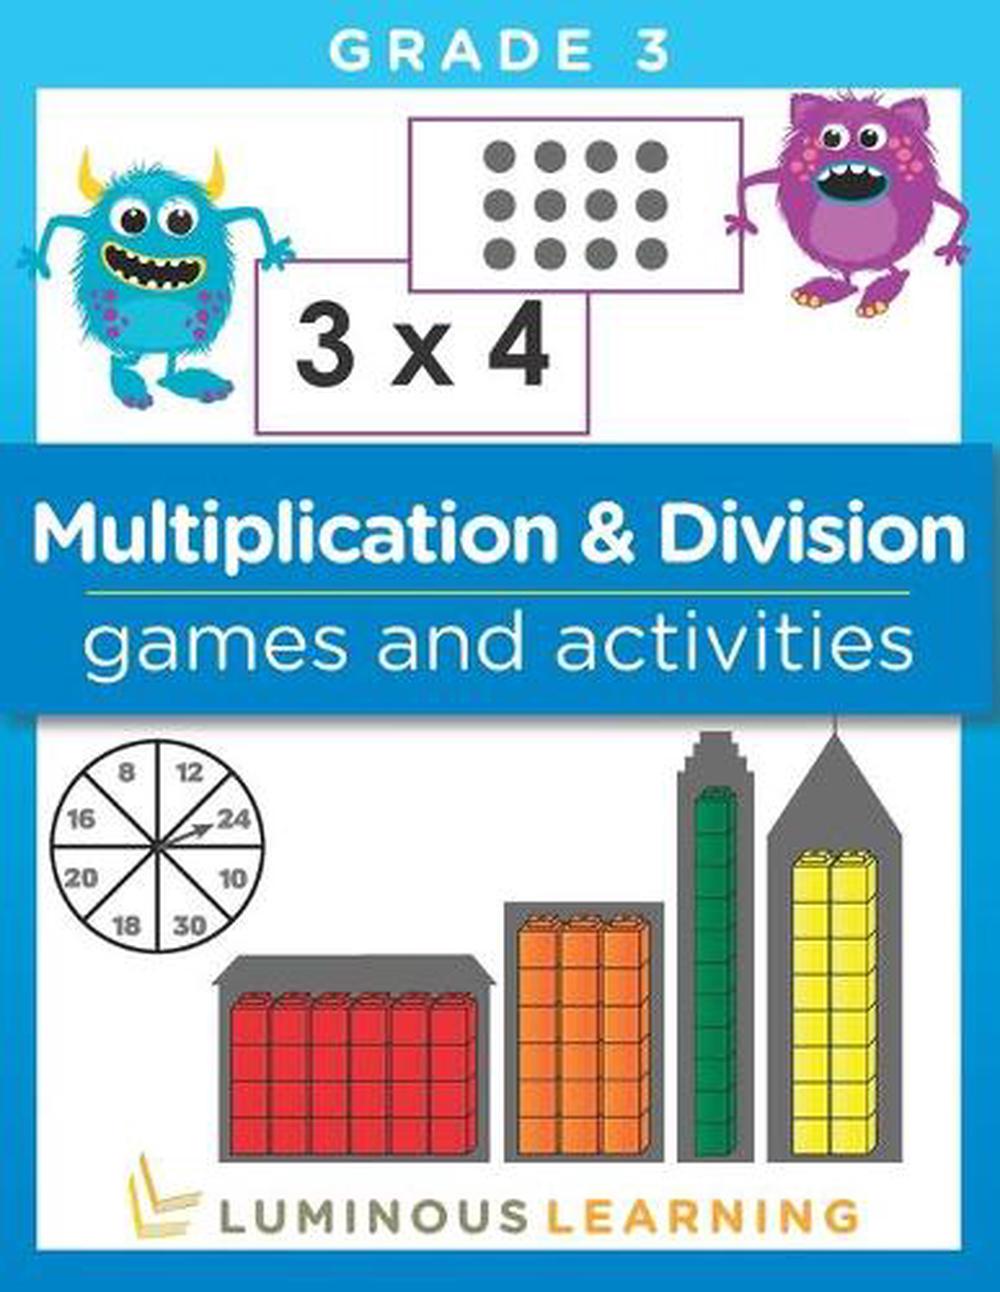 multiplication-and-division-games-and-activities-grade-3-math